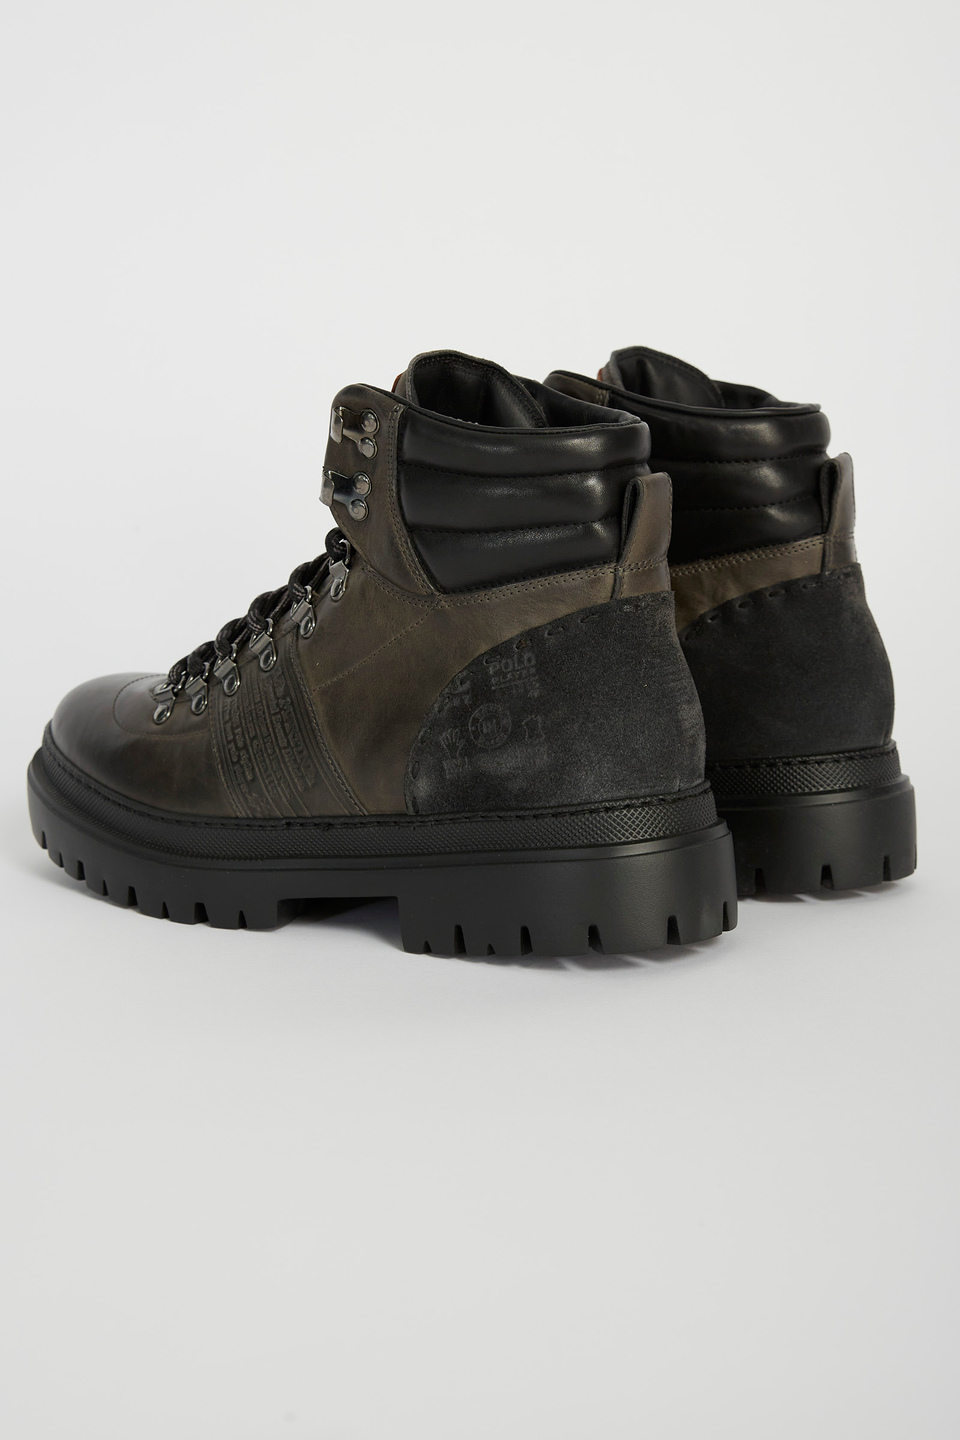 Combat boot in mixed leather | La Martina - Official Online Shop